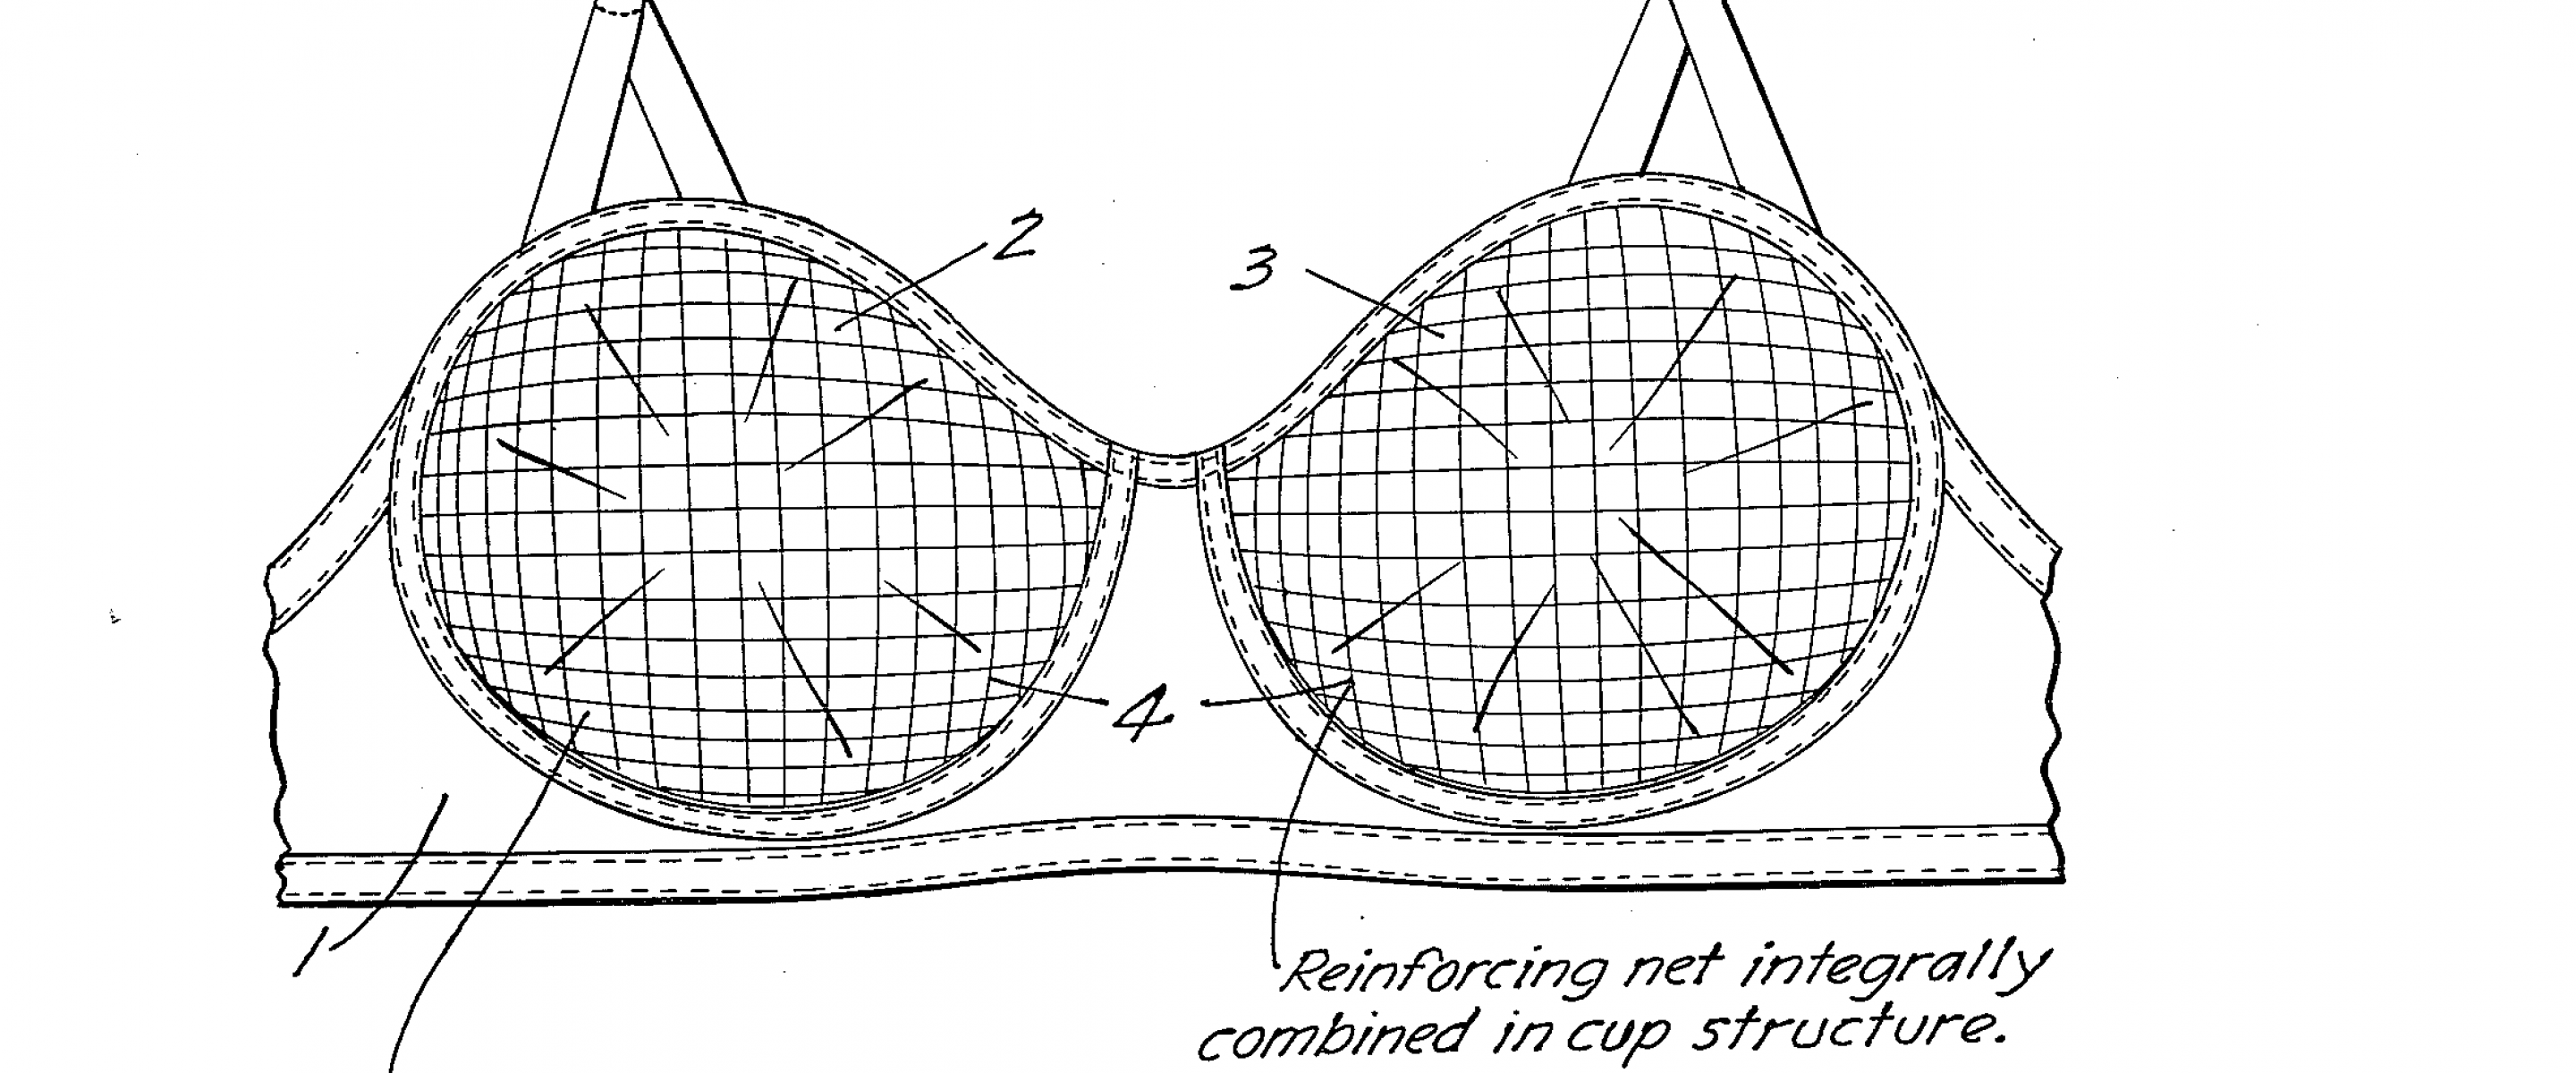 3M's masks were conceived as bra cups